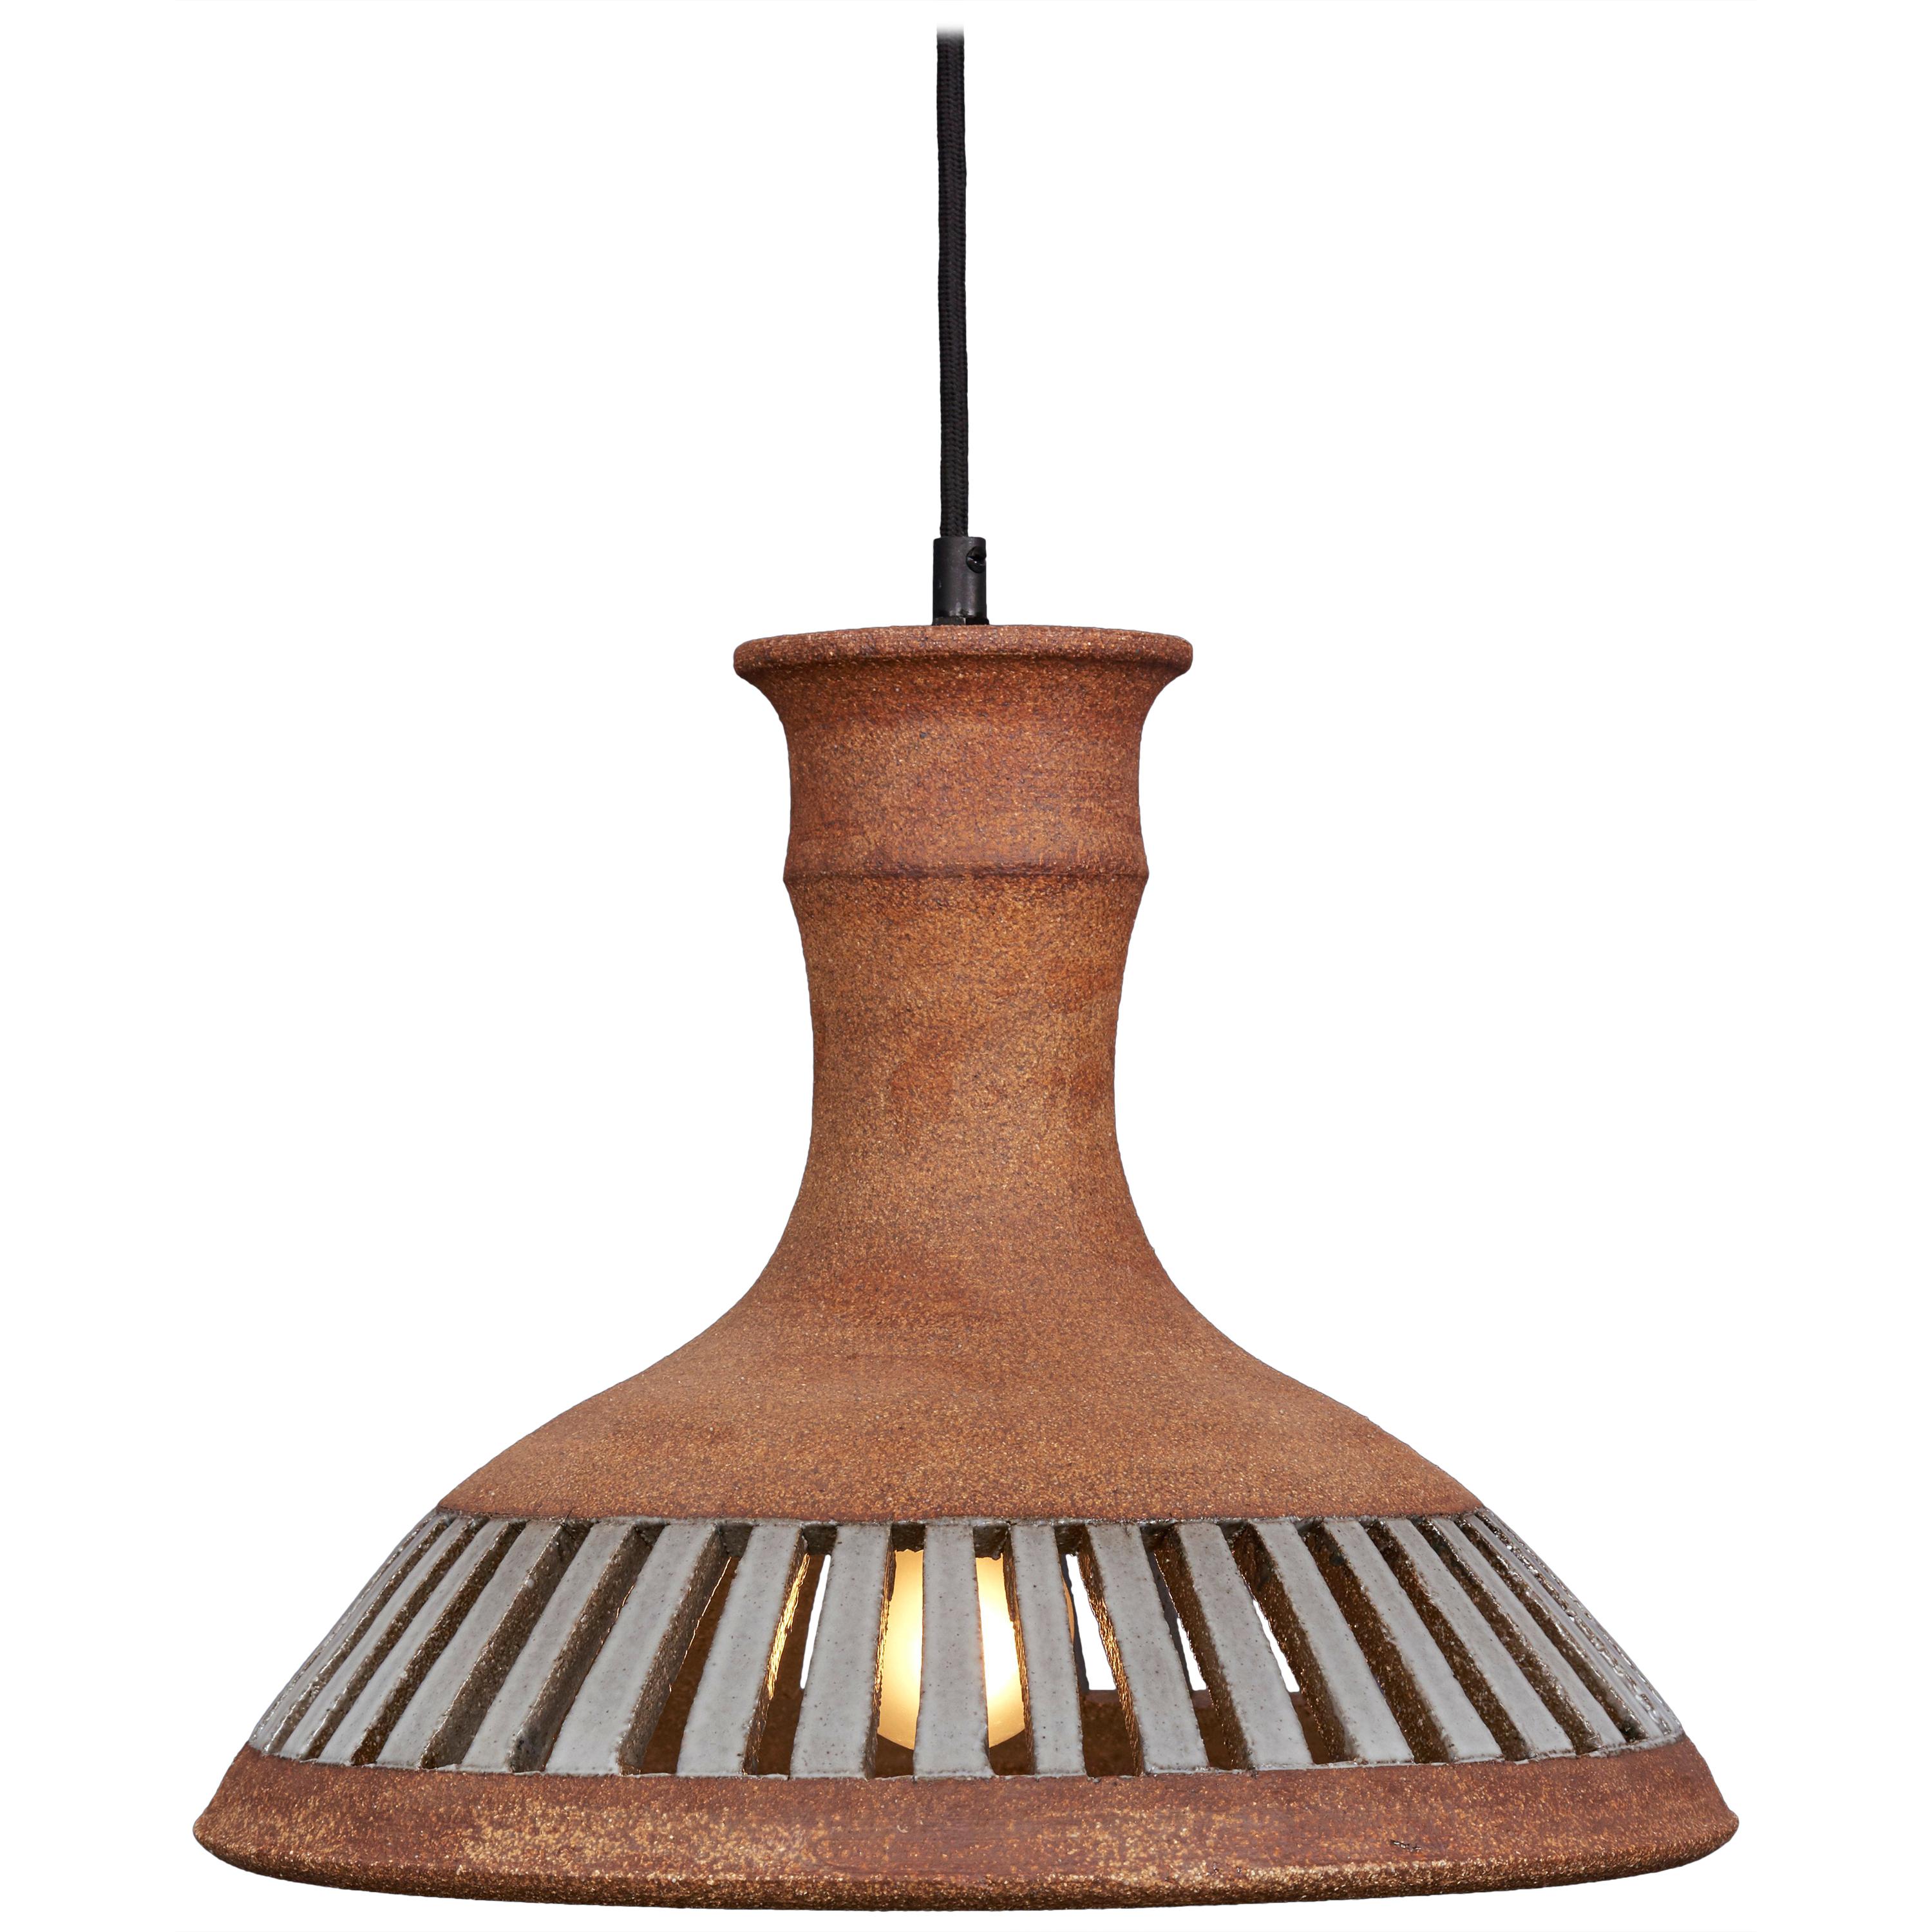 Clay Outdoor Hanging Light HL 10 by Brent J. Bennett, US, 2019